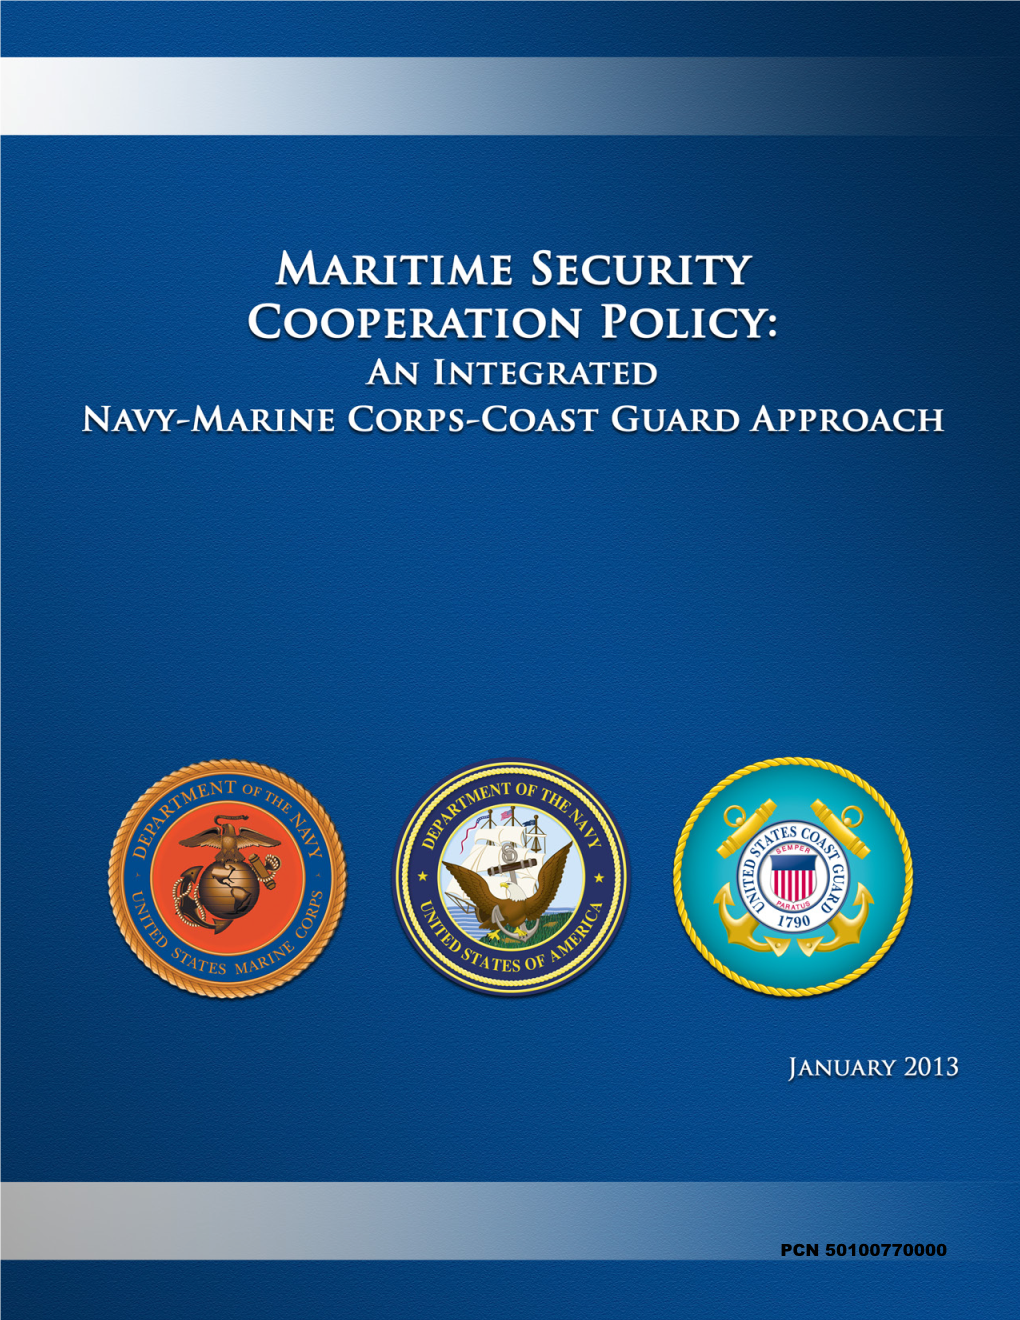 Maritime Security Cooperation Policy